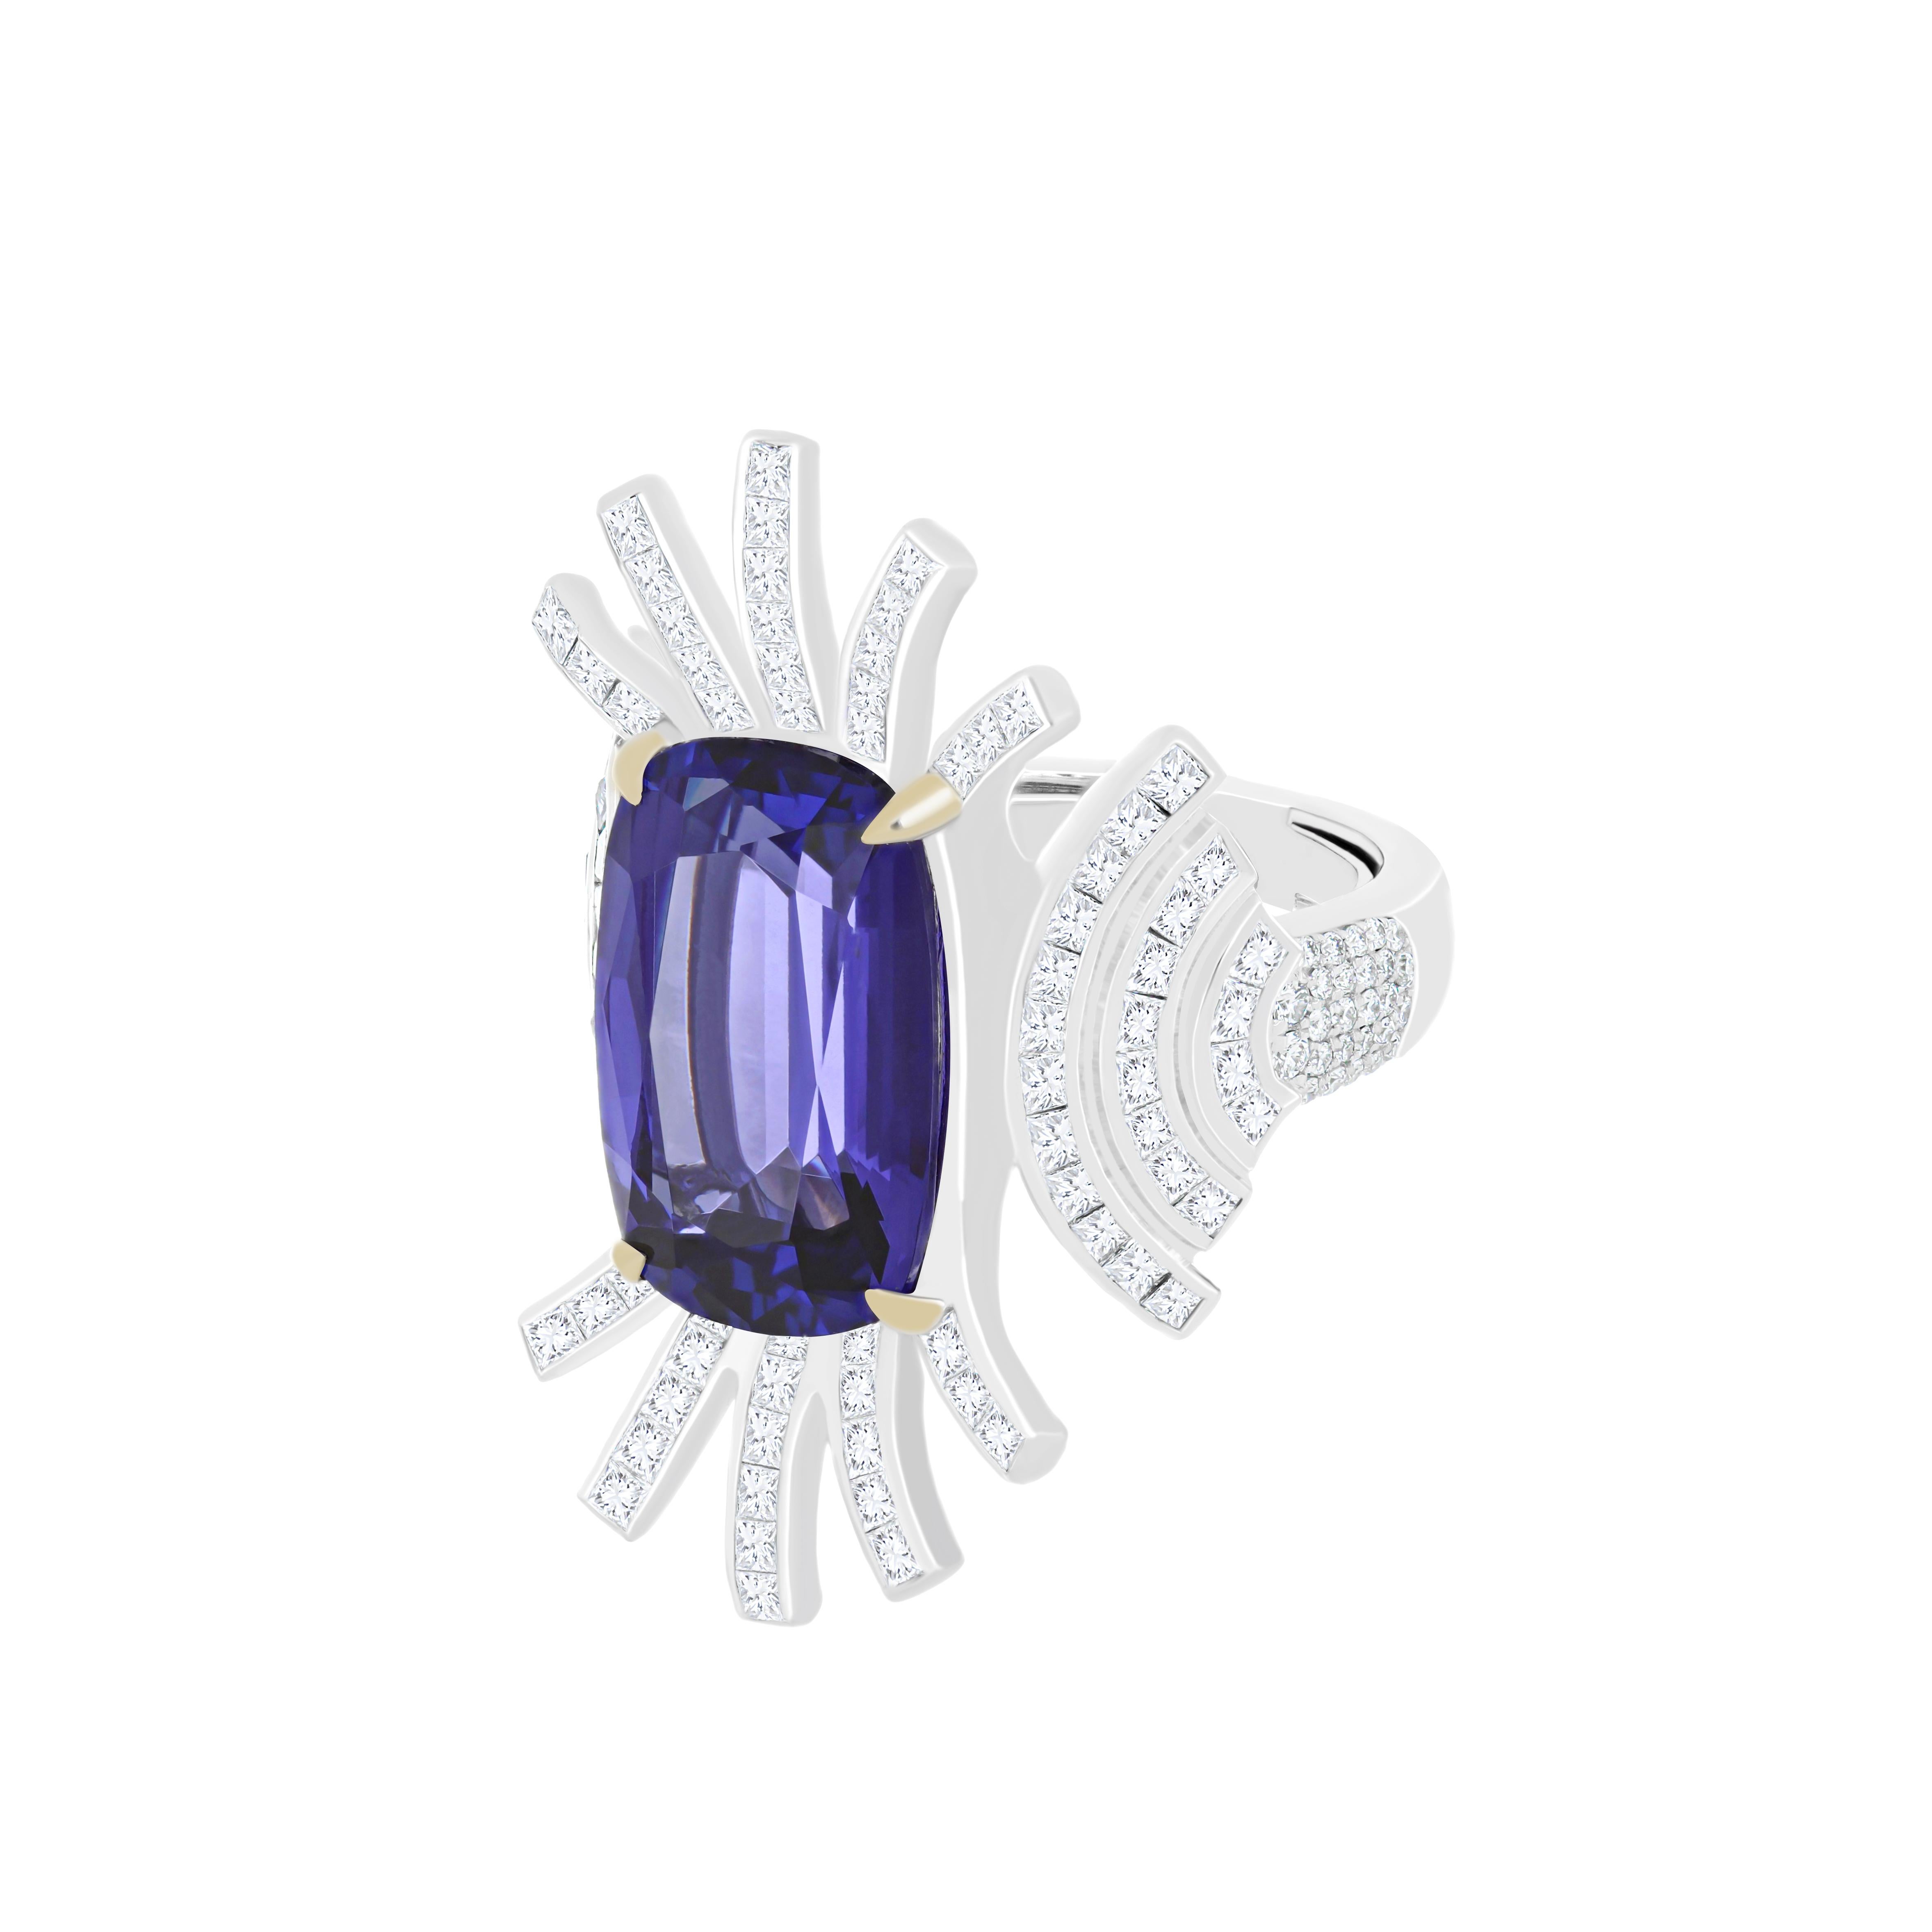 Elegant and Exquisitely detailed White Gold Ring, with a rare 10.4 Cts (approx.) Cushion Round Corner in faceted Cut Tanzanite set in the center beautifully accented with Micro pave set Diamonds, weighing approx. 2.7 CT's (approx.). total carats